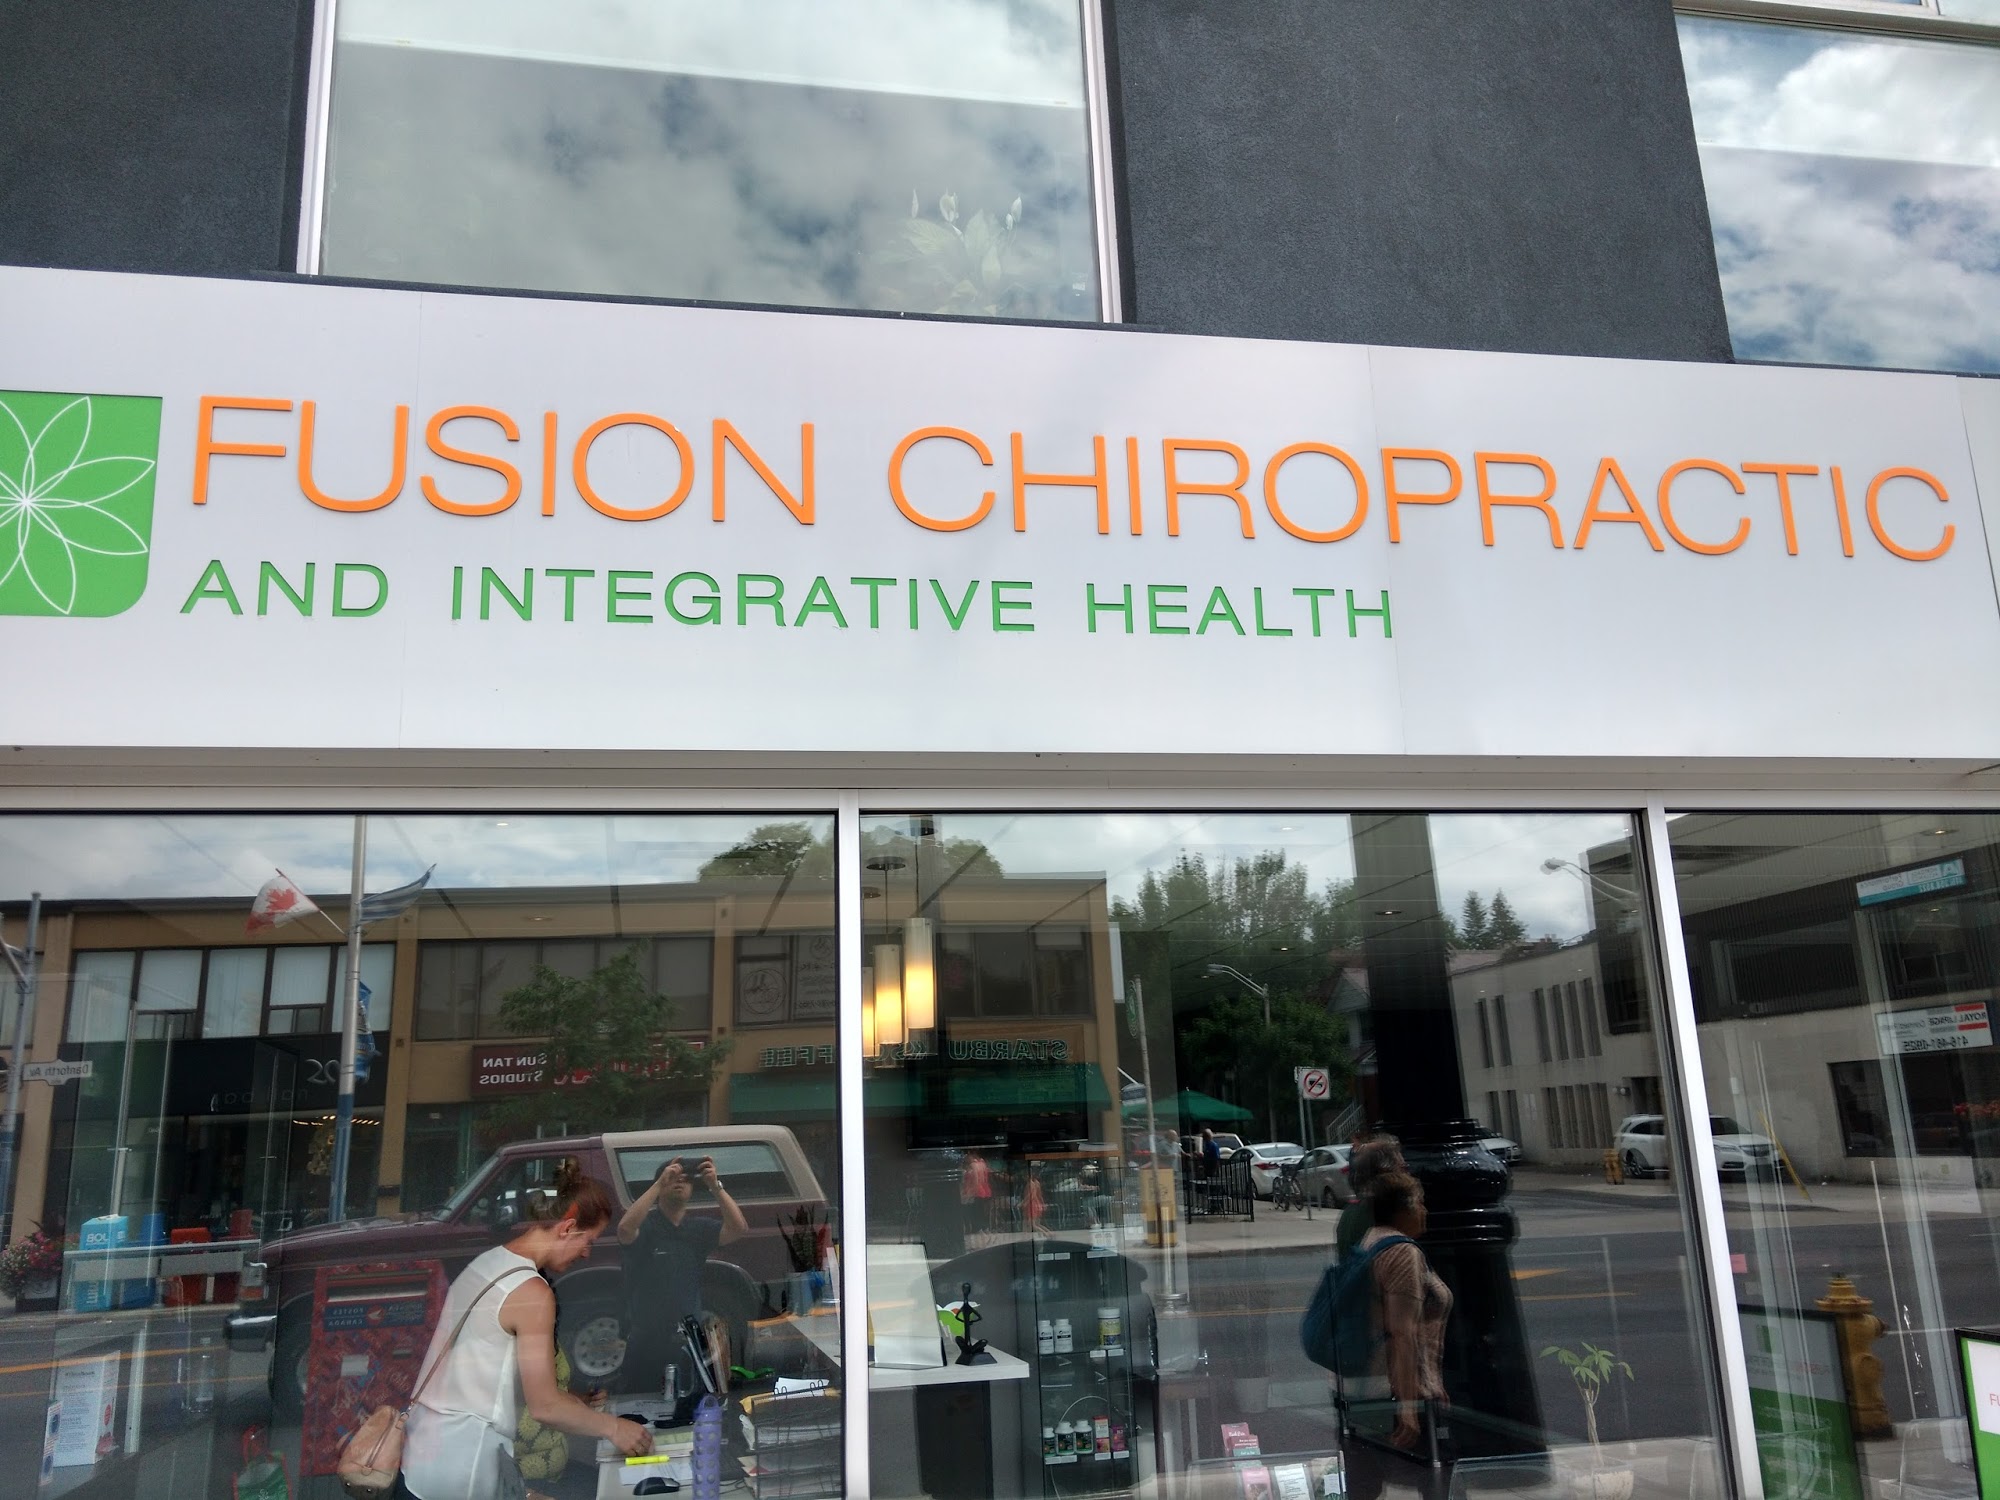 Fusion Chiropractic